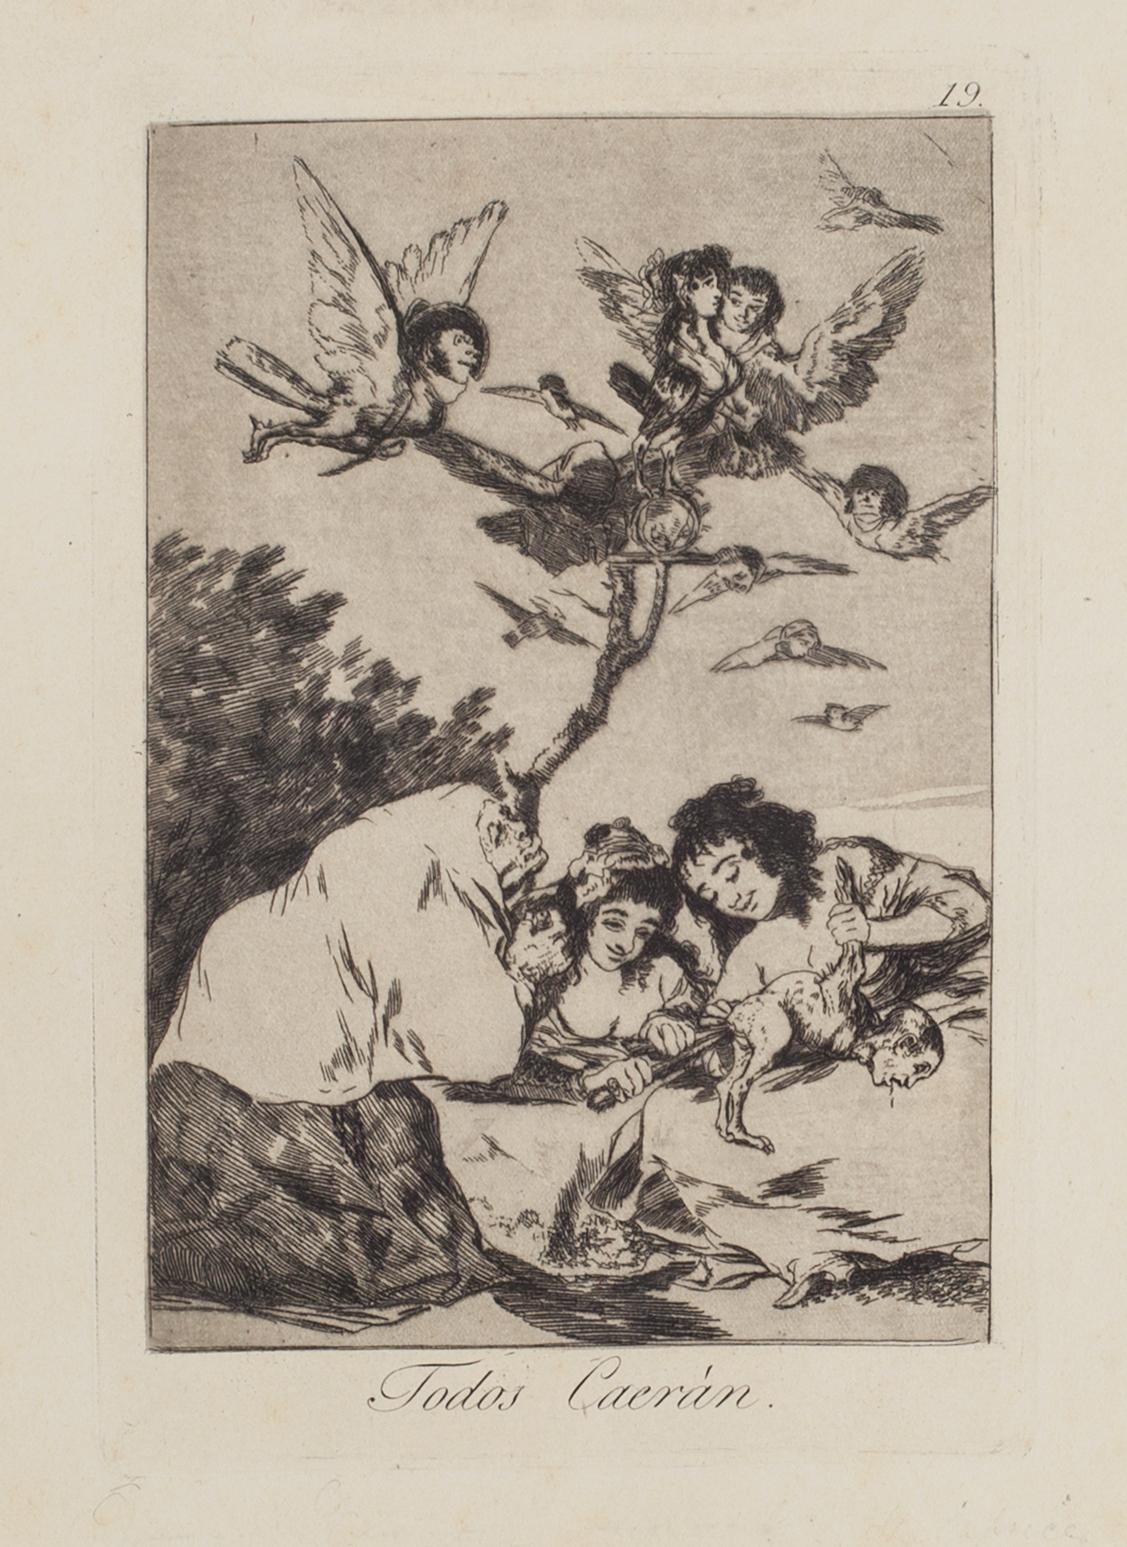 Todos Caeran is an original artwork realized by the artist Francisco Goya and published in 1799 for the first time.

Original Etching on wove paper. Image dimensions: 21.5 x 14.5 cm.

The etching belongs to the Third Edition of "Los Caprichos" a